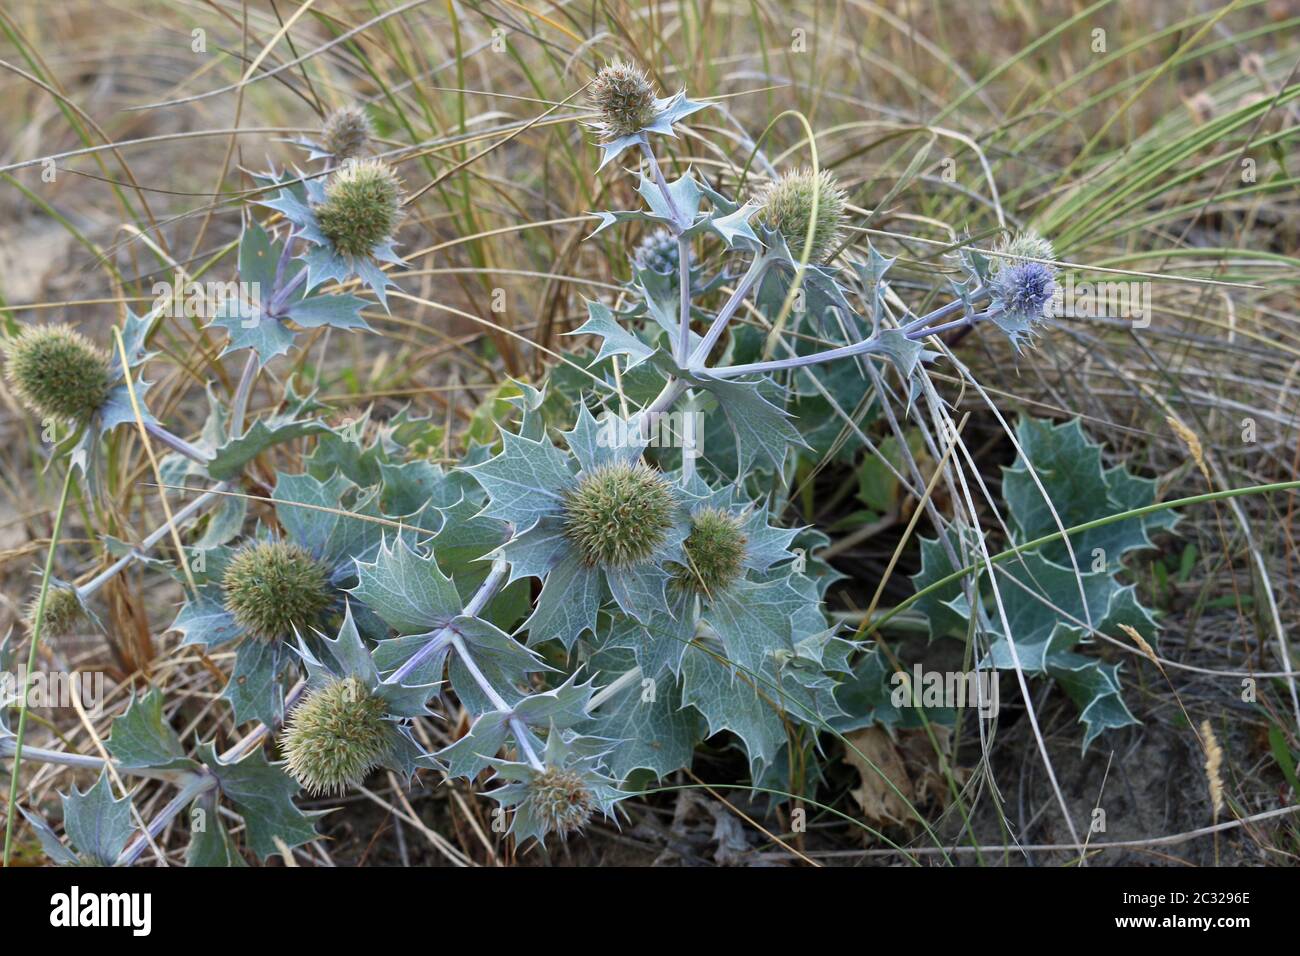 Native UK sea holly, Eryngium maritimum, in flower and growing on a sand dune with grass in the background. Stock Photo